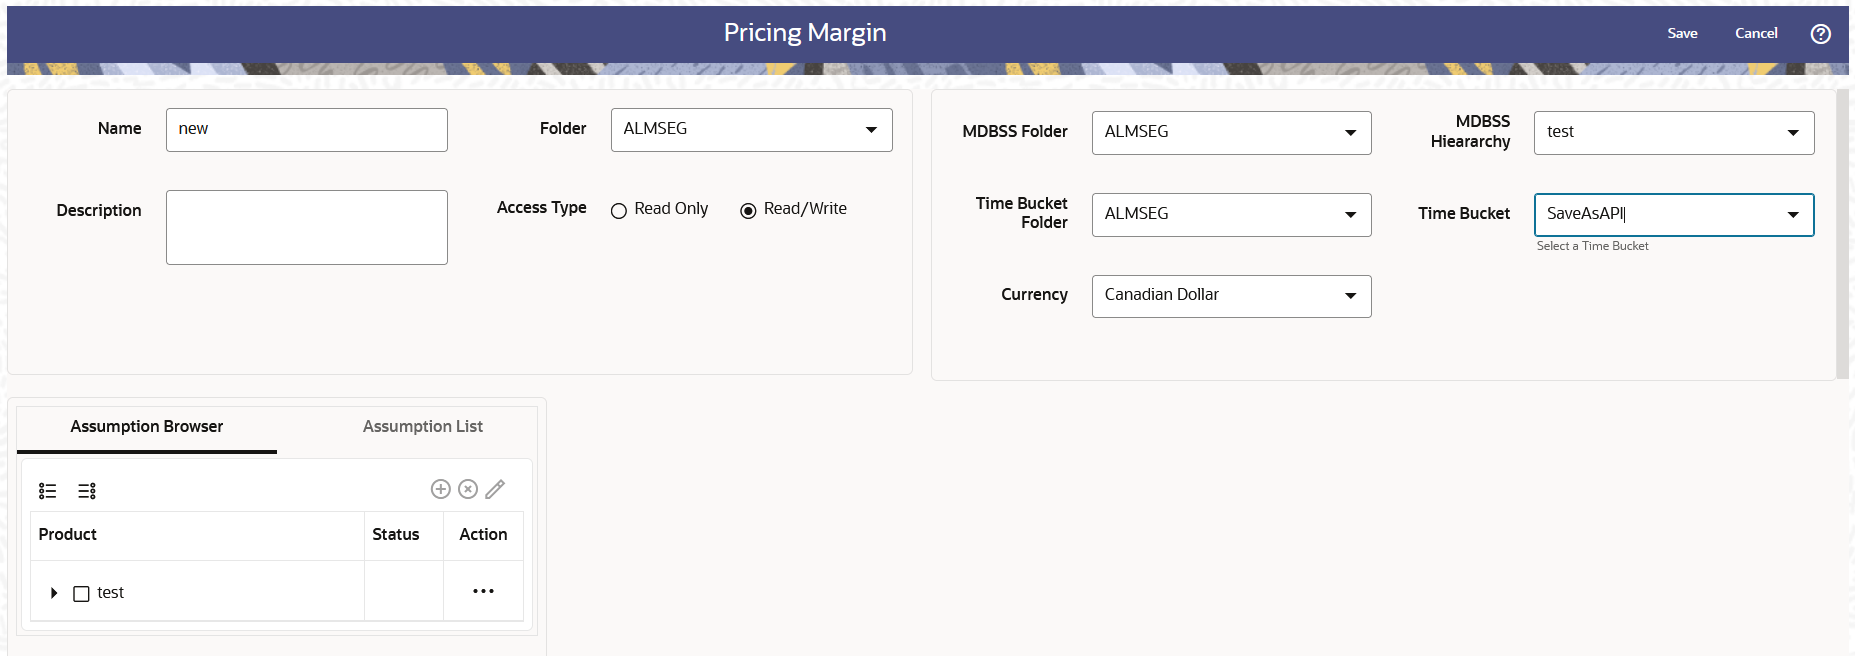 Pricing Margin Page